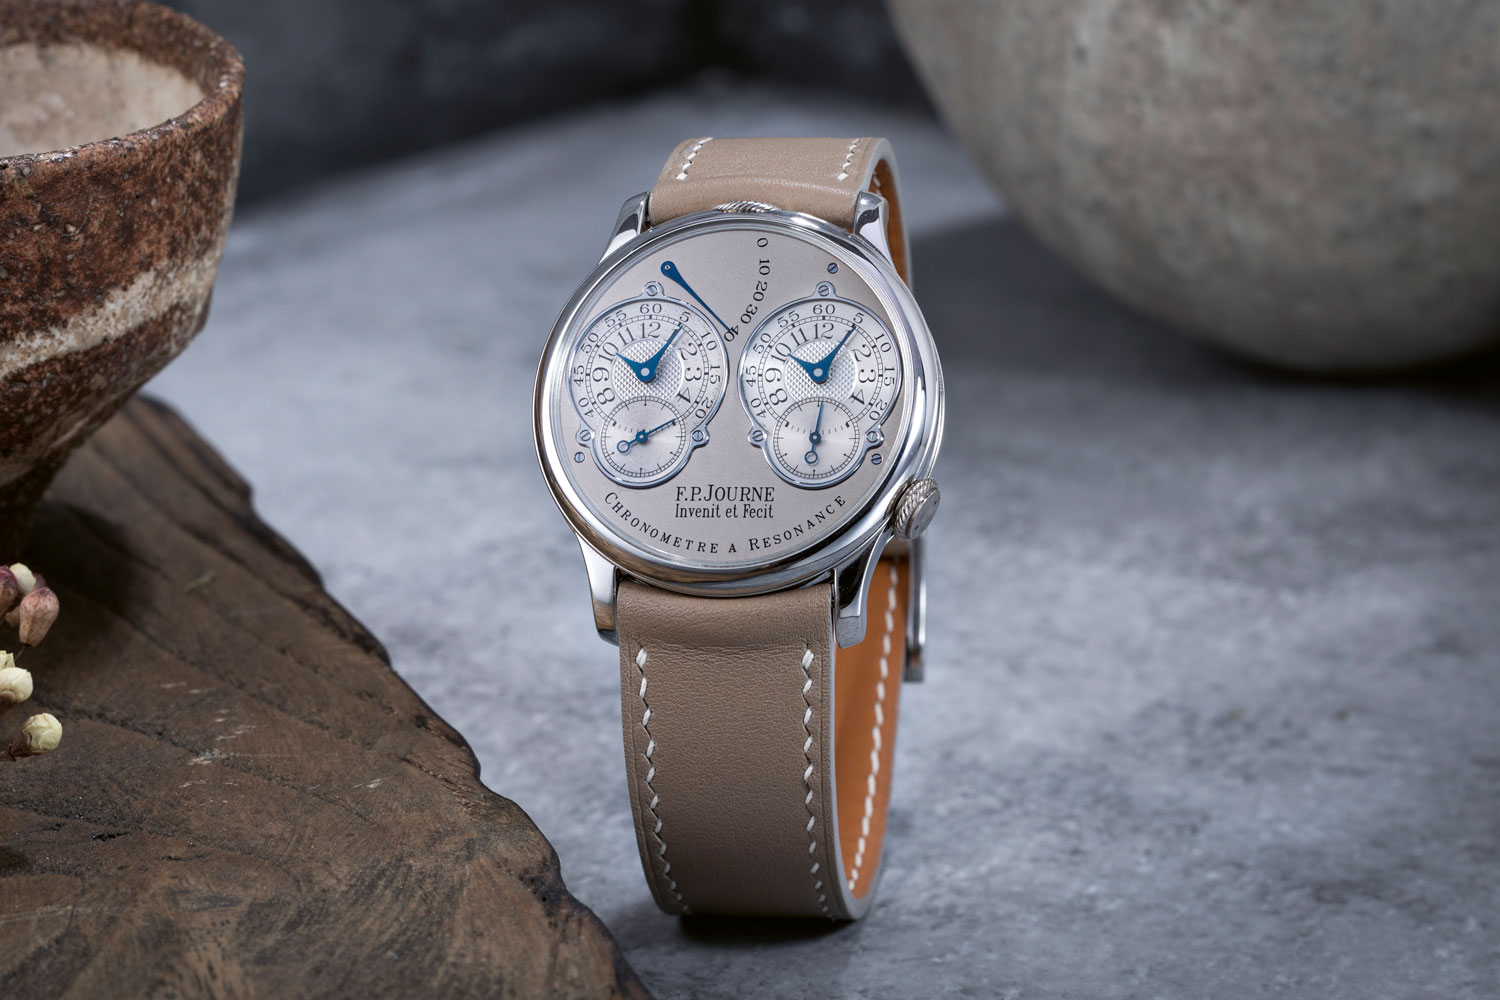 Journe's most important watch to date, the Chronomètre à Résonance (Image: The Hour Glass)